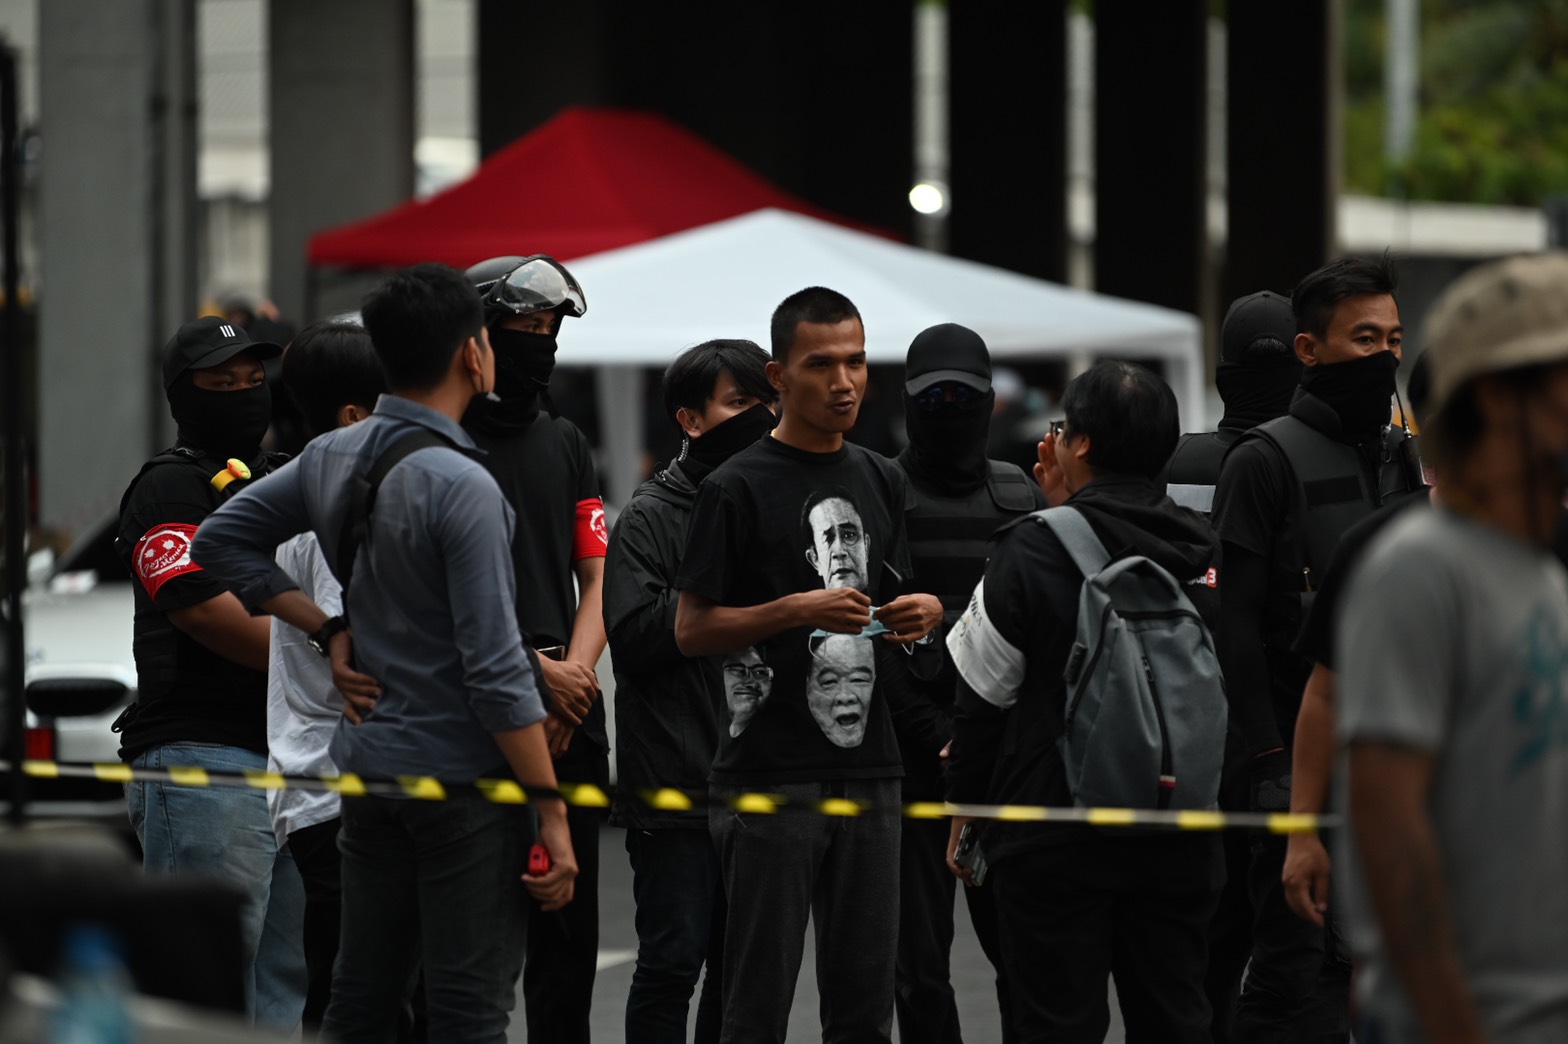 Protesters' security details stand guard next to protest leader Panupong “Mike” Jadnok at the protest on Dec. 2, 2020.